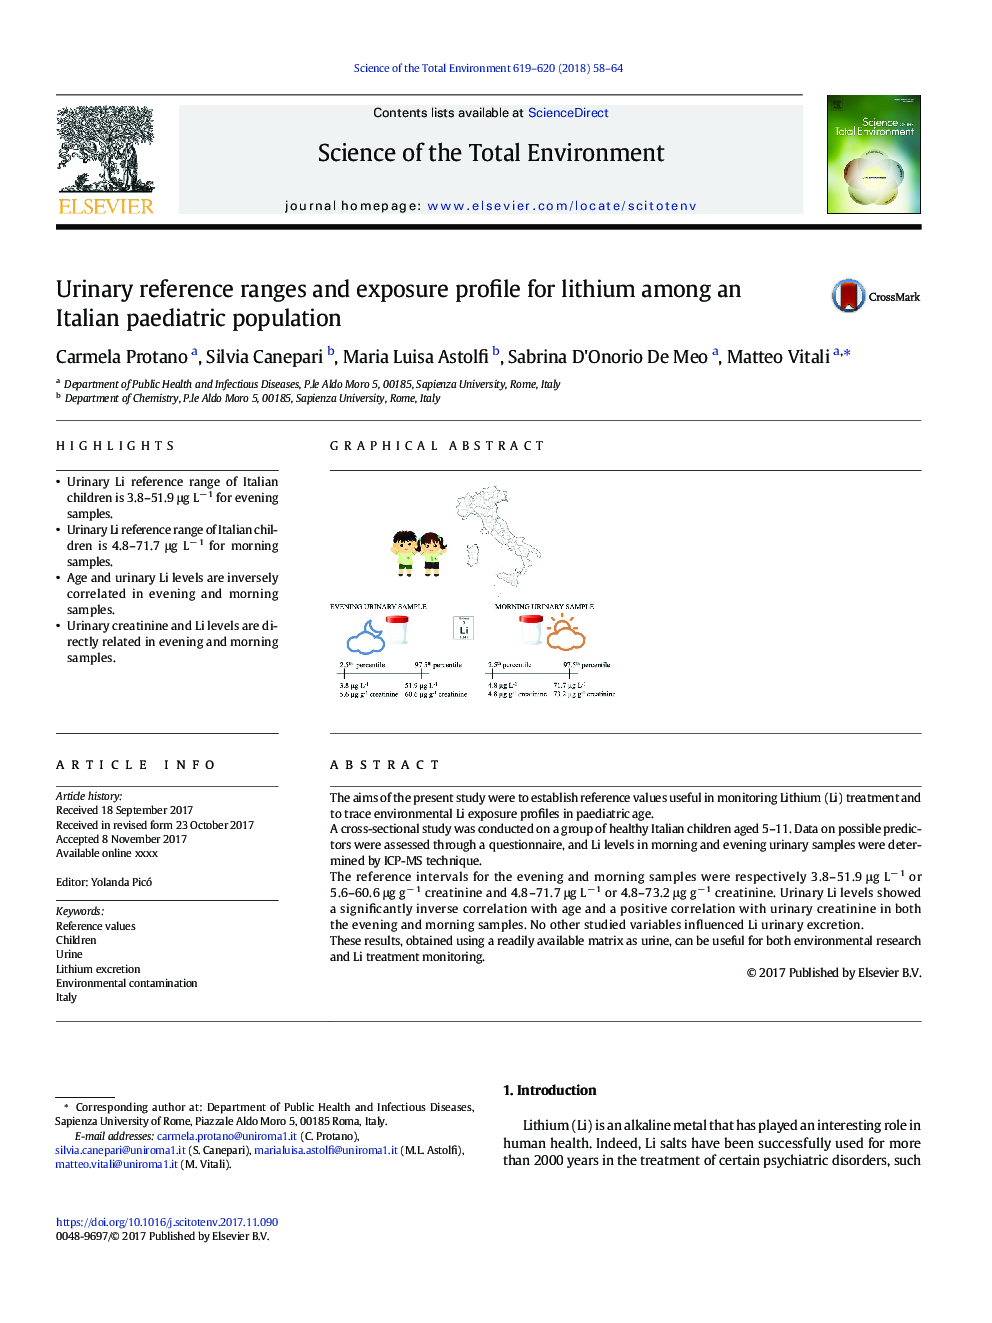 Urinary reference ranges and exposure profile for lithium among an Italian paediatric population